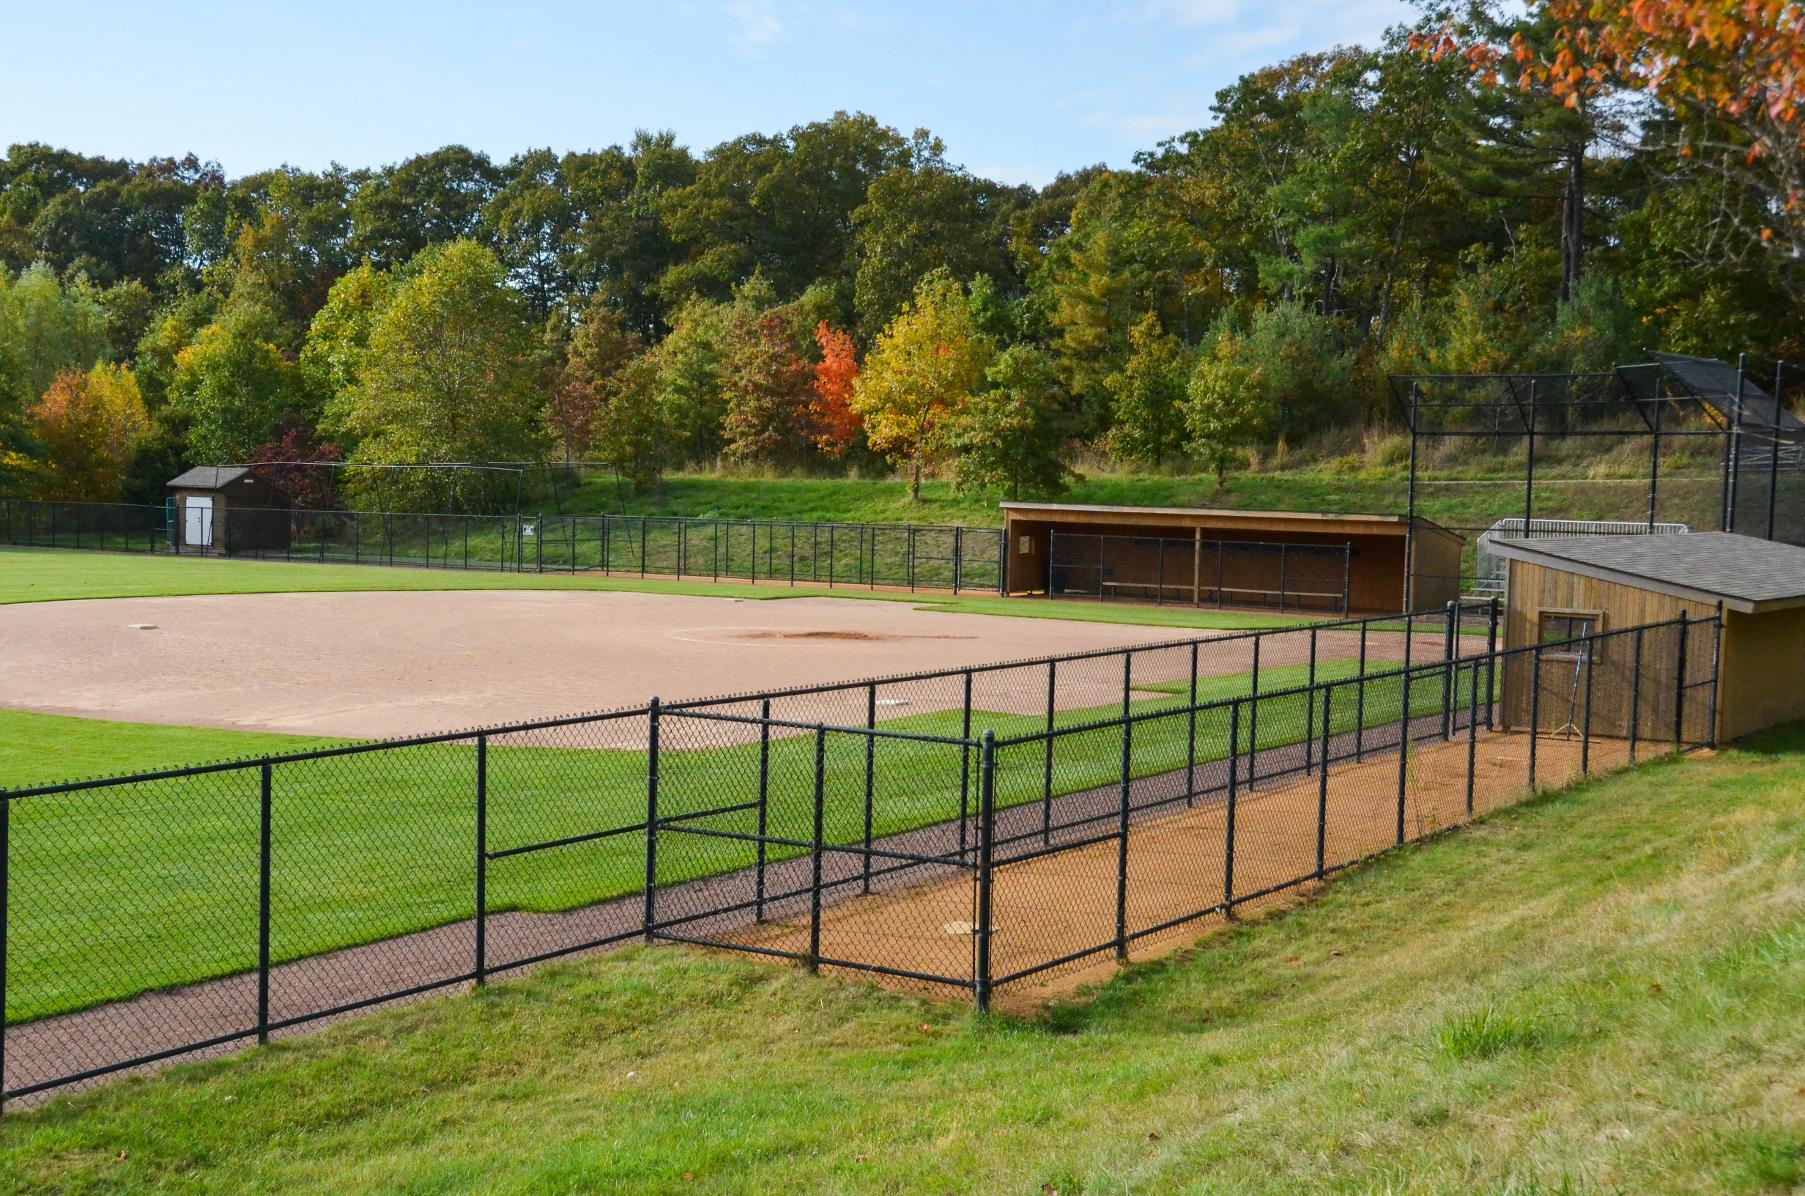 Softball field infield,  fencing and dugouts